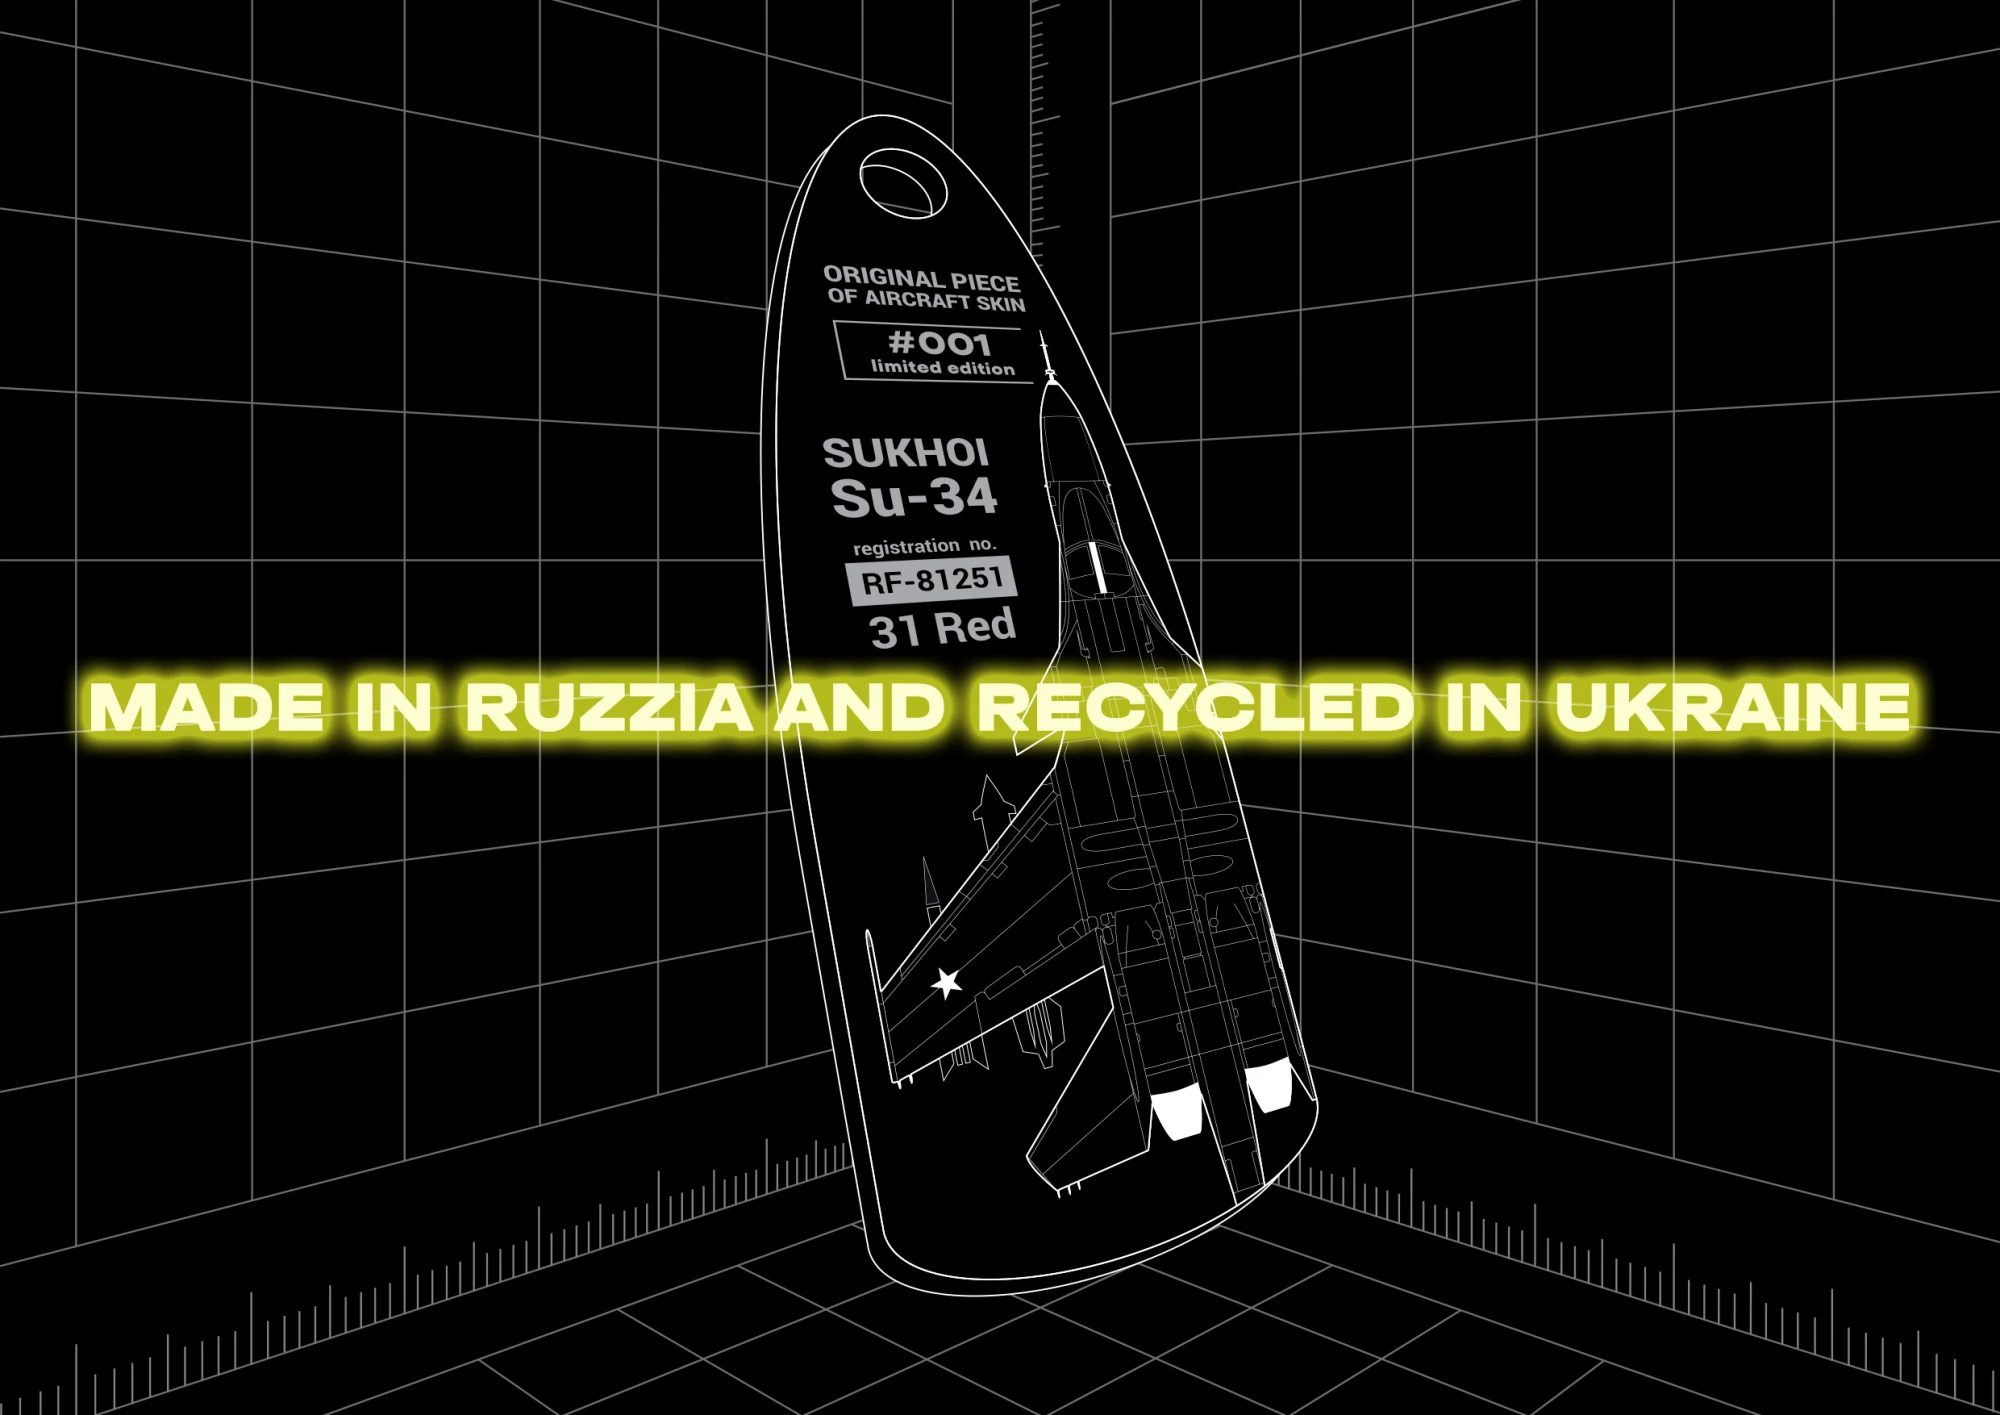 Made in ruzzia and recycled in Ukraine